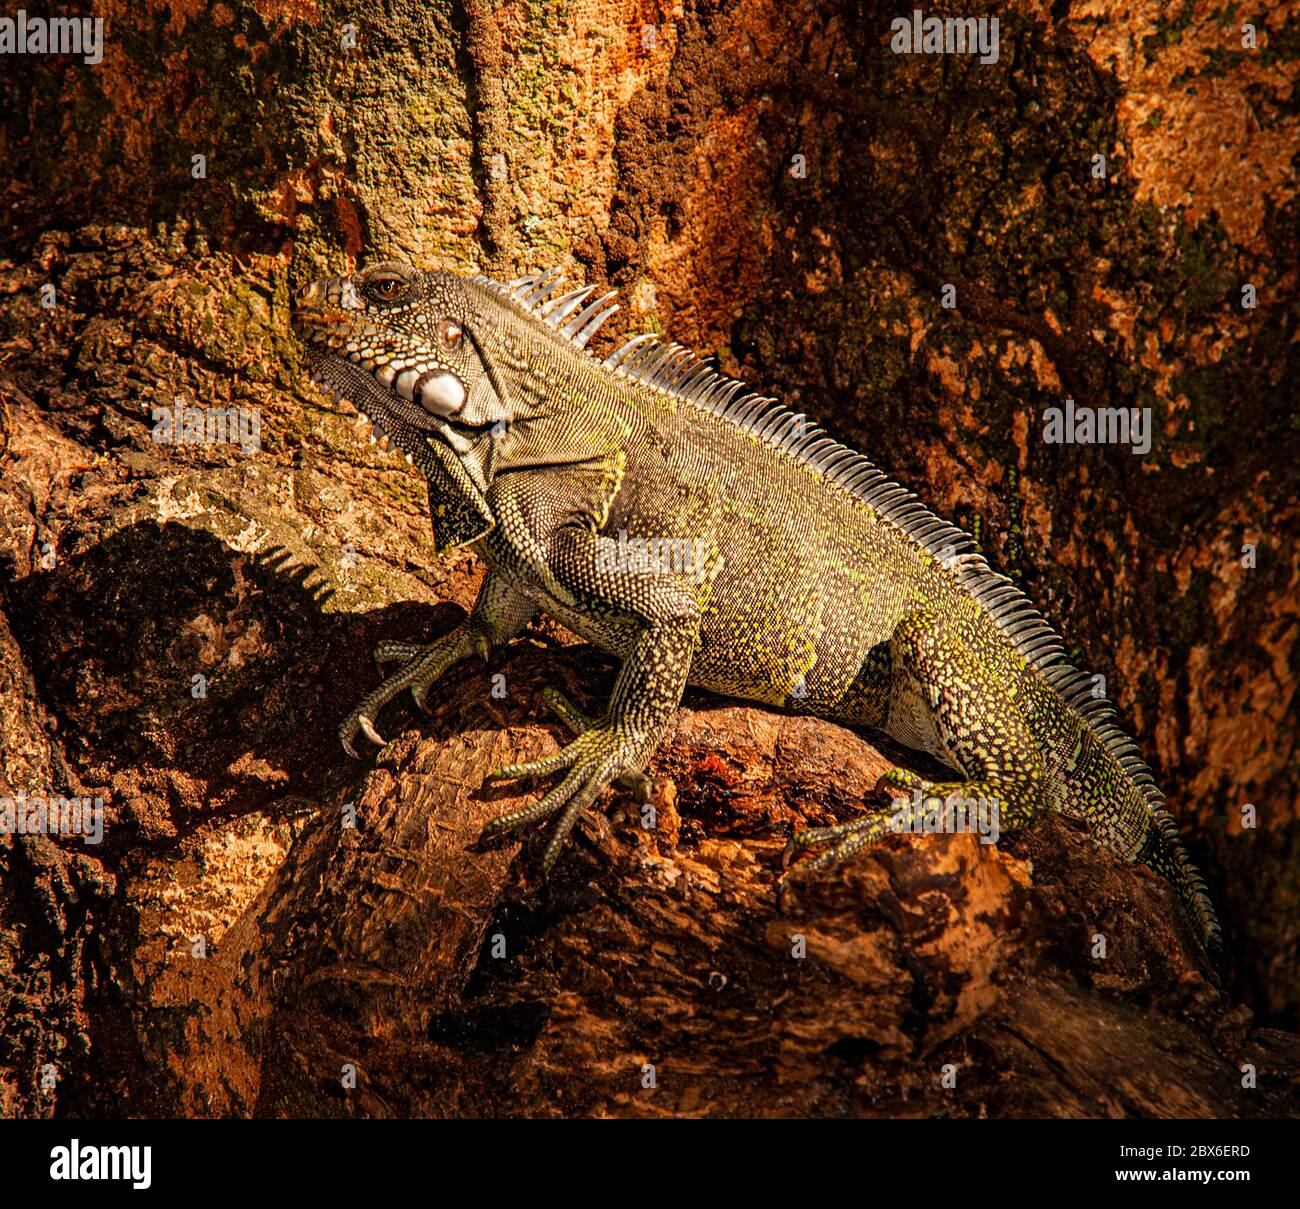 Iguana climbs a tree in Southern Colombia Stock Photo